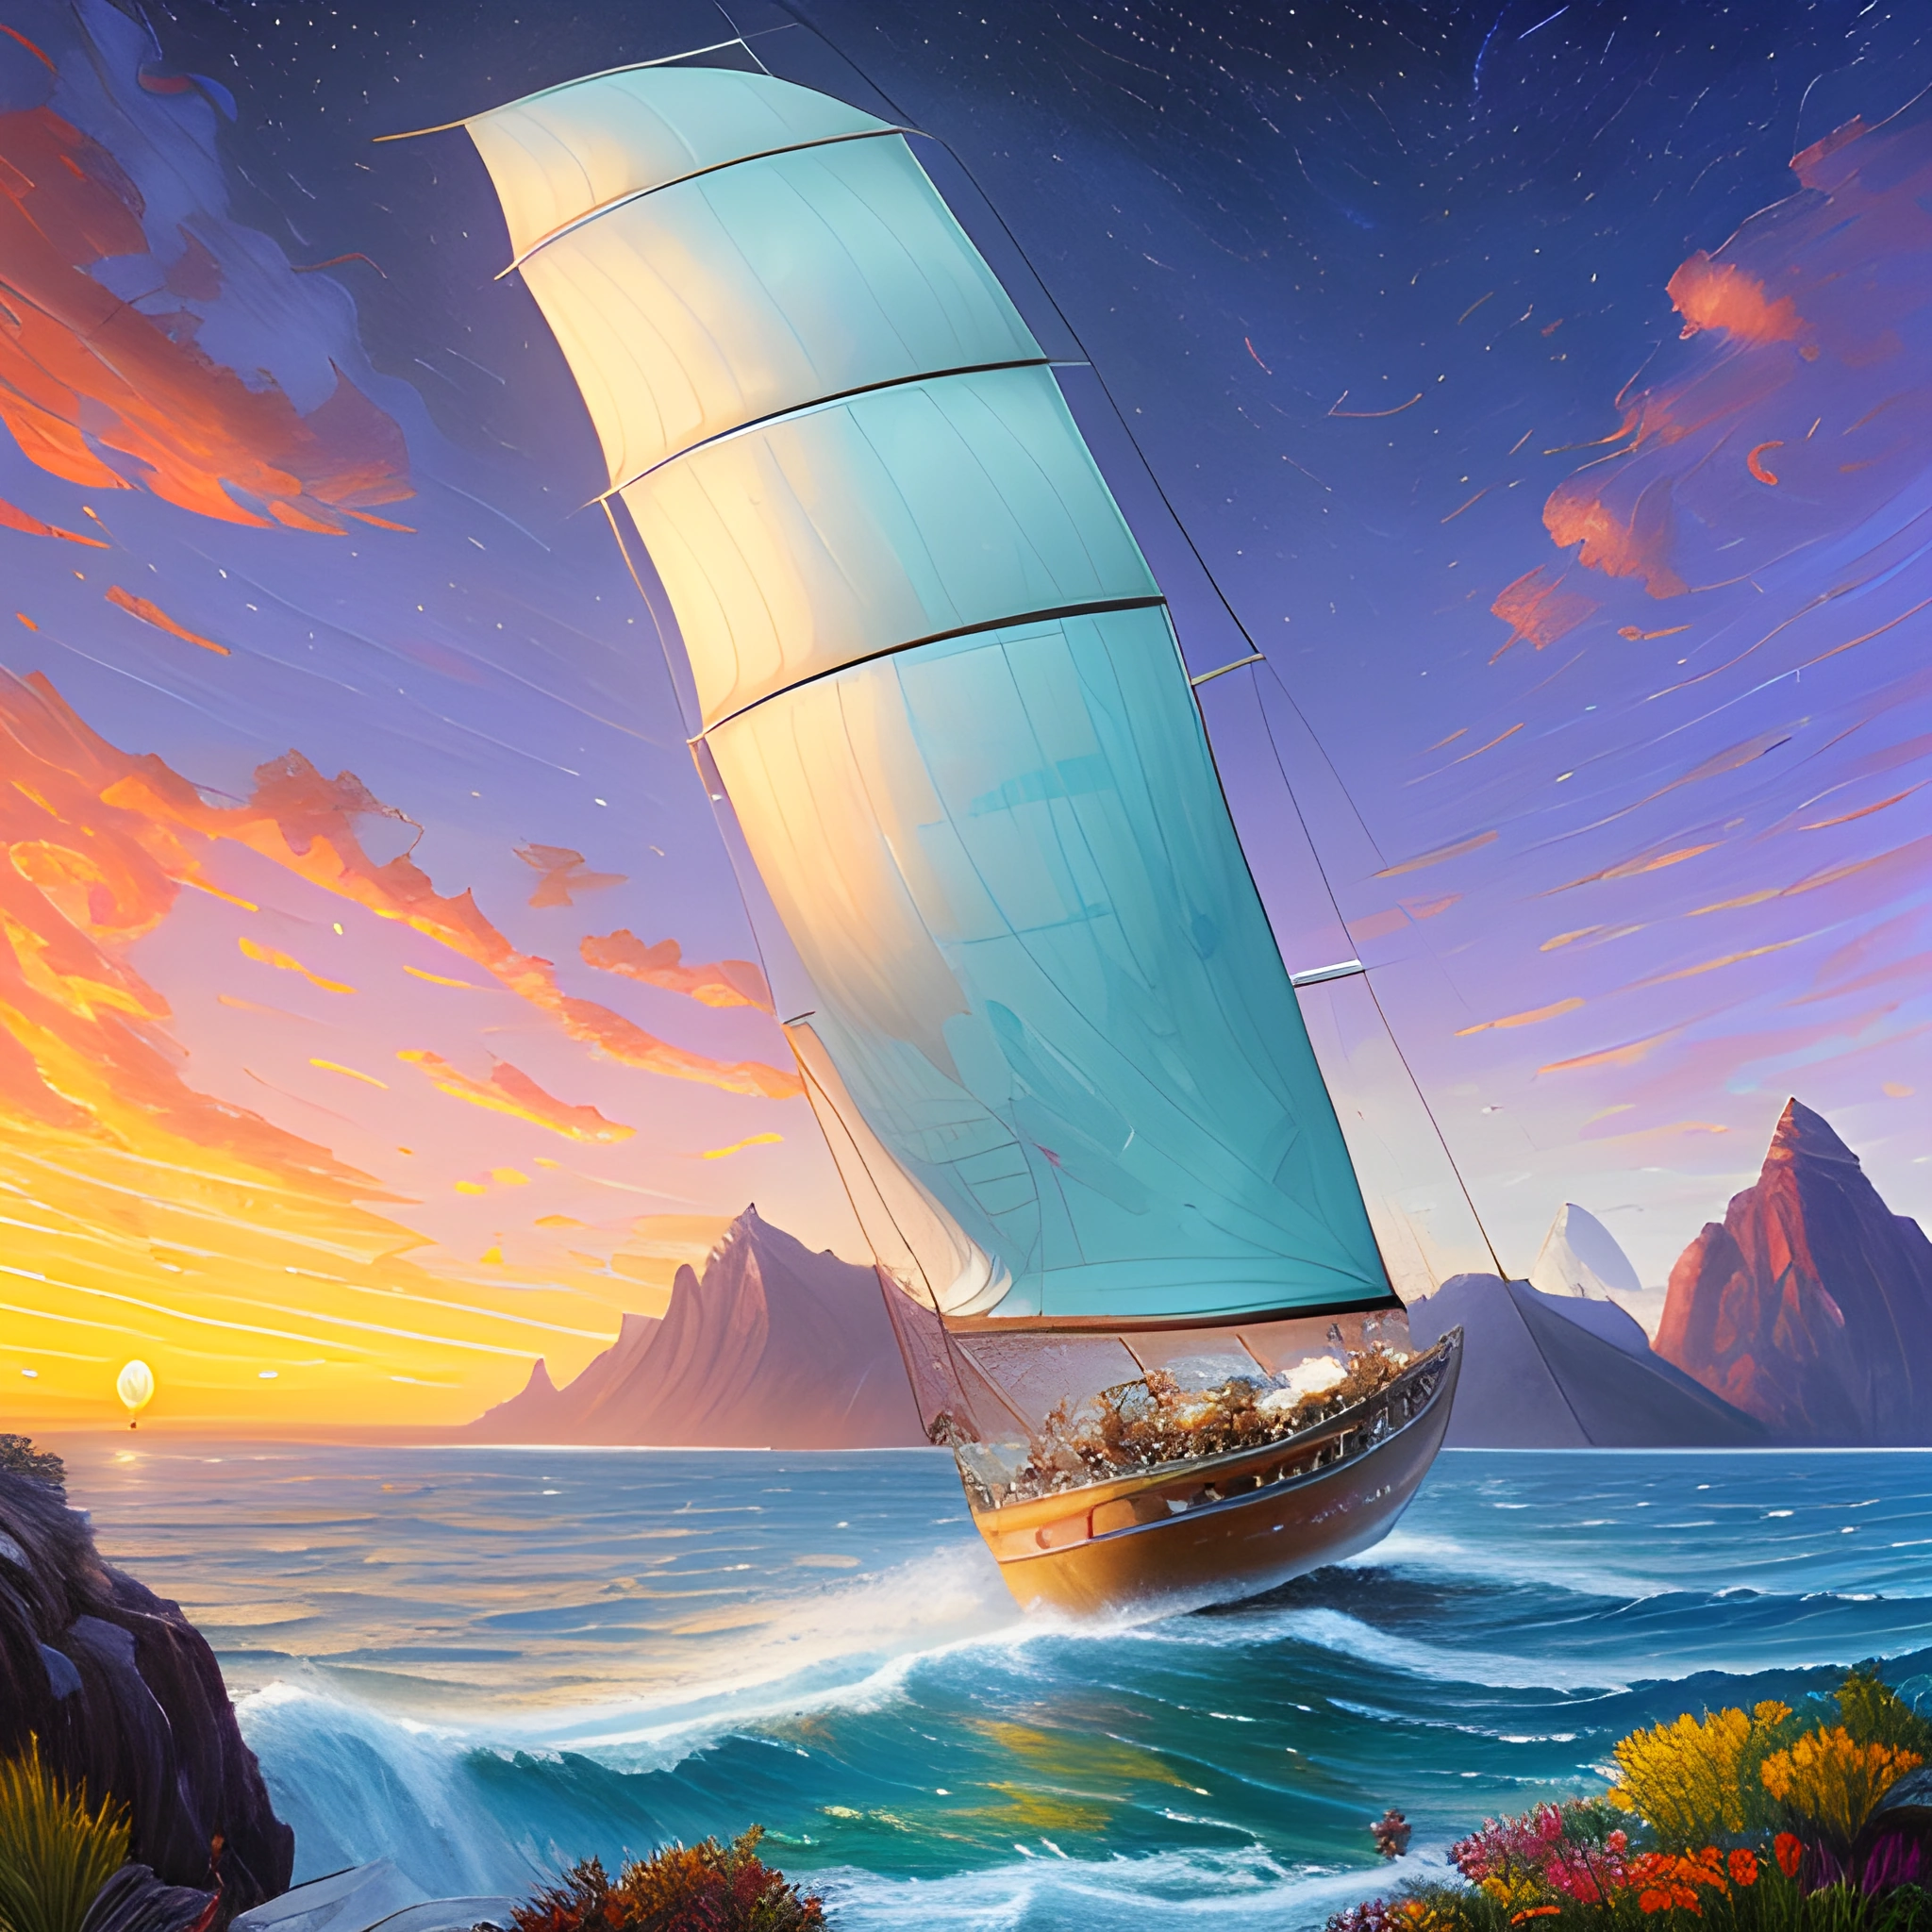 painting of a sailboat sailing in the ocean at sunset